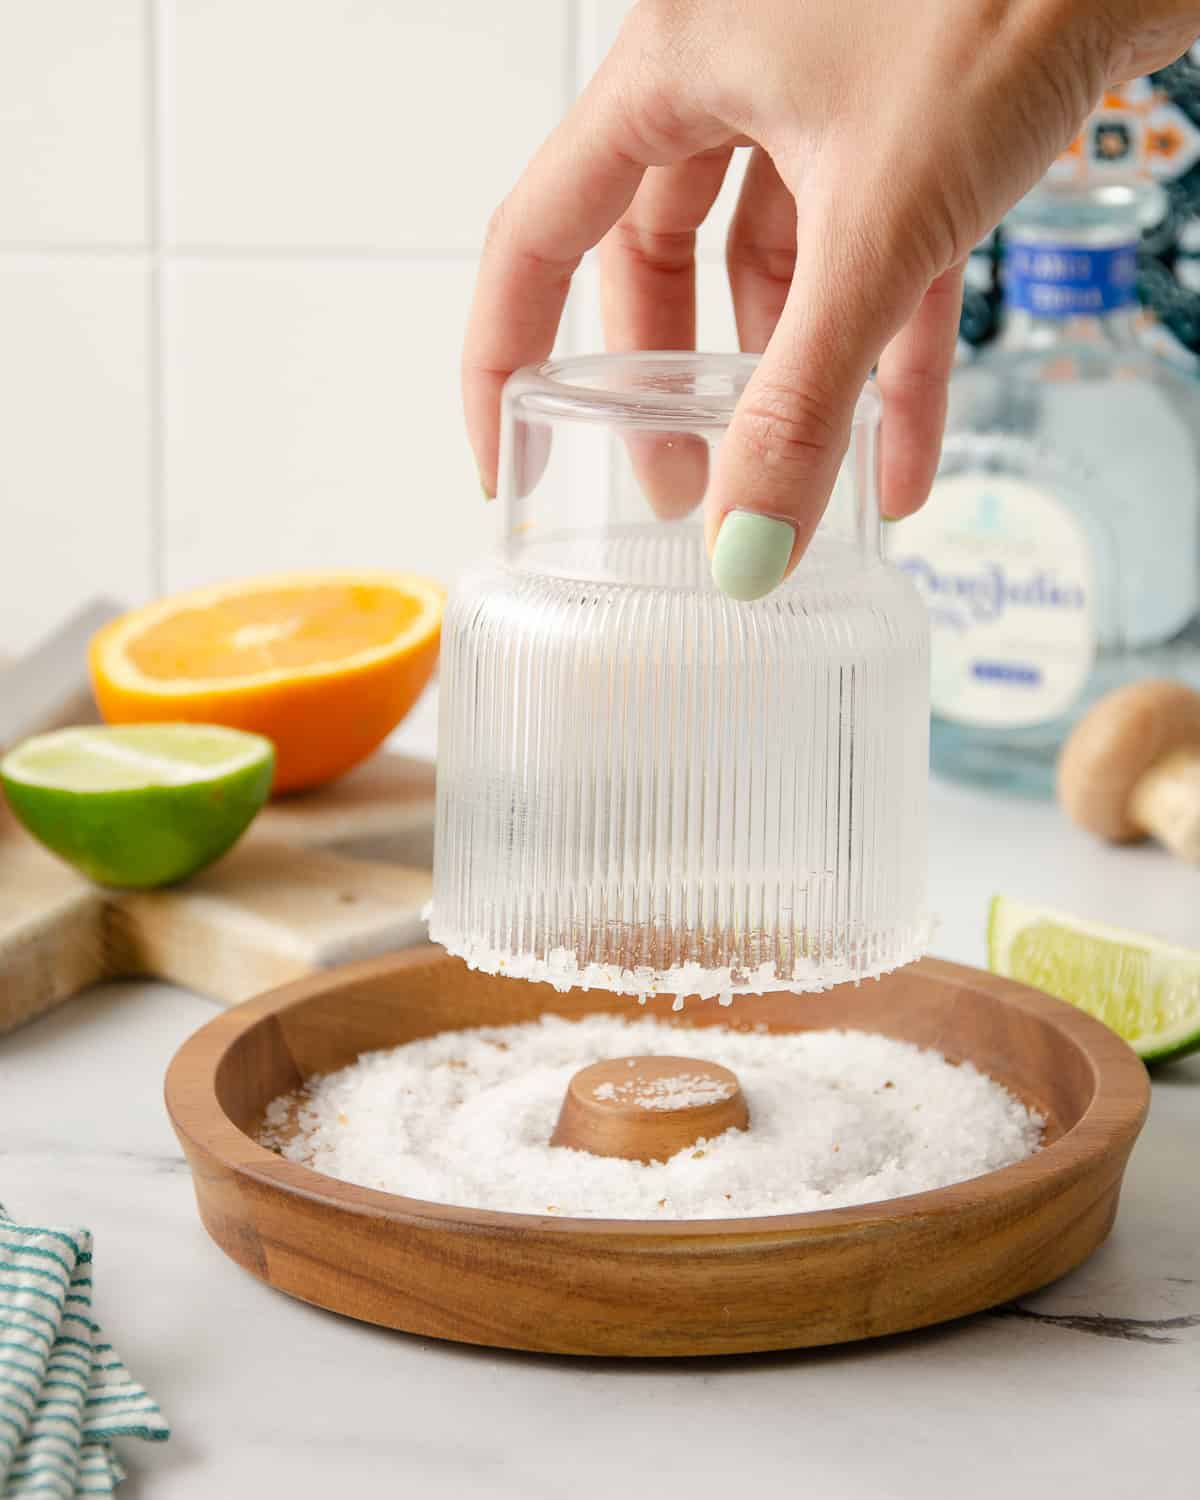 Pulling a glass straight out of margarita salt.